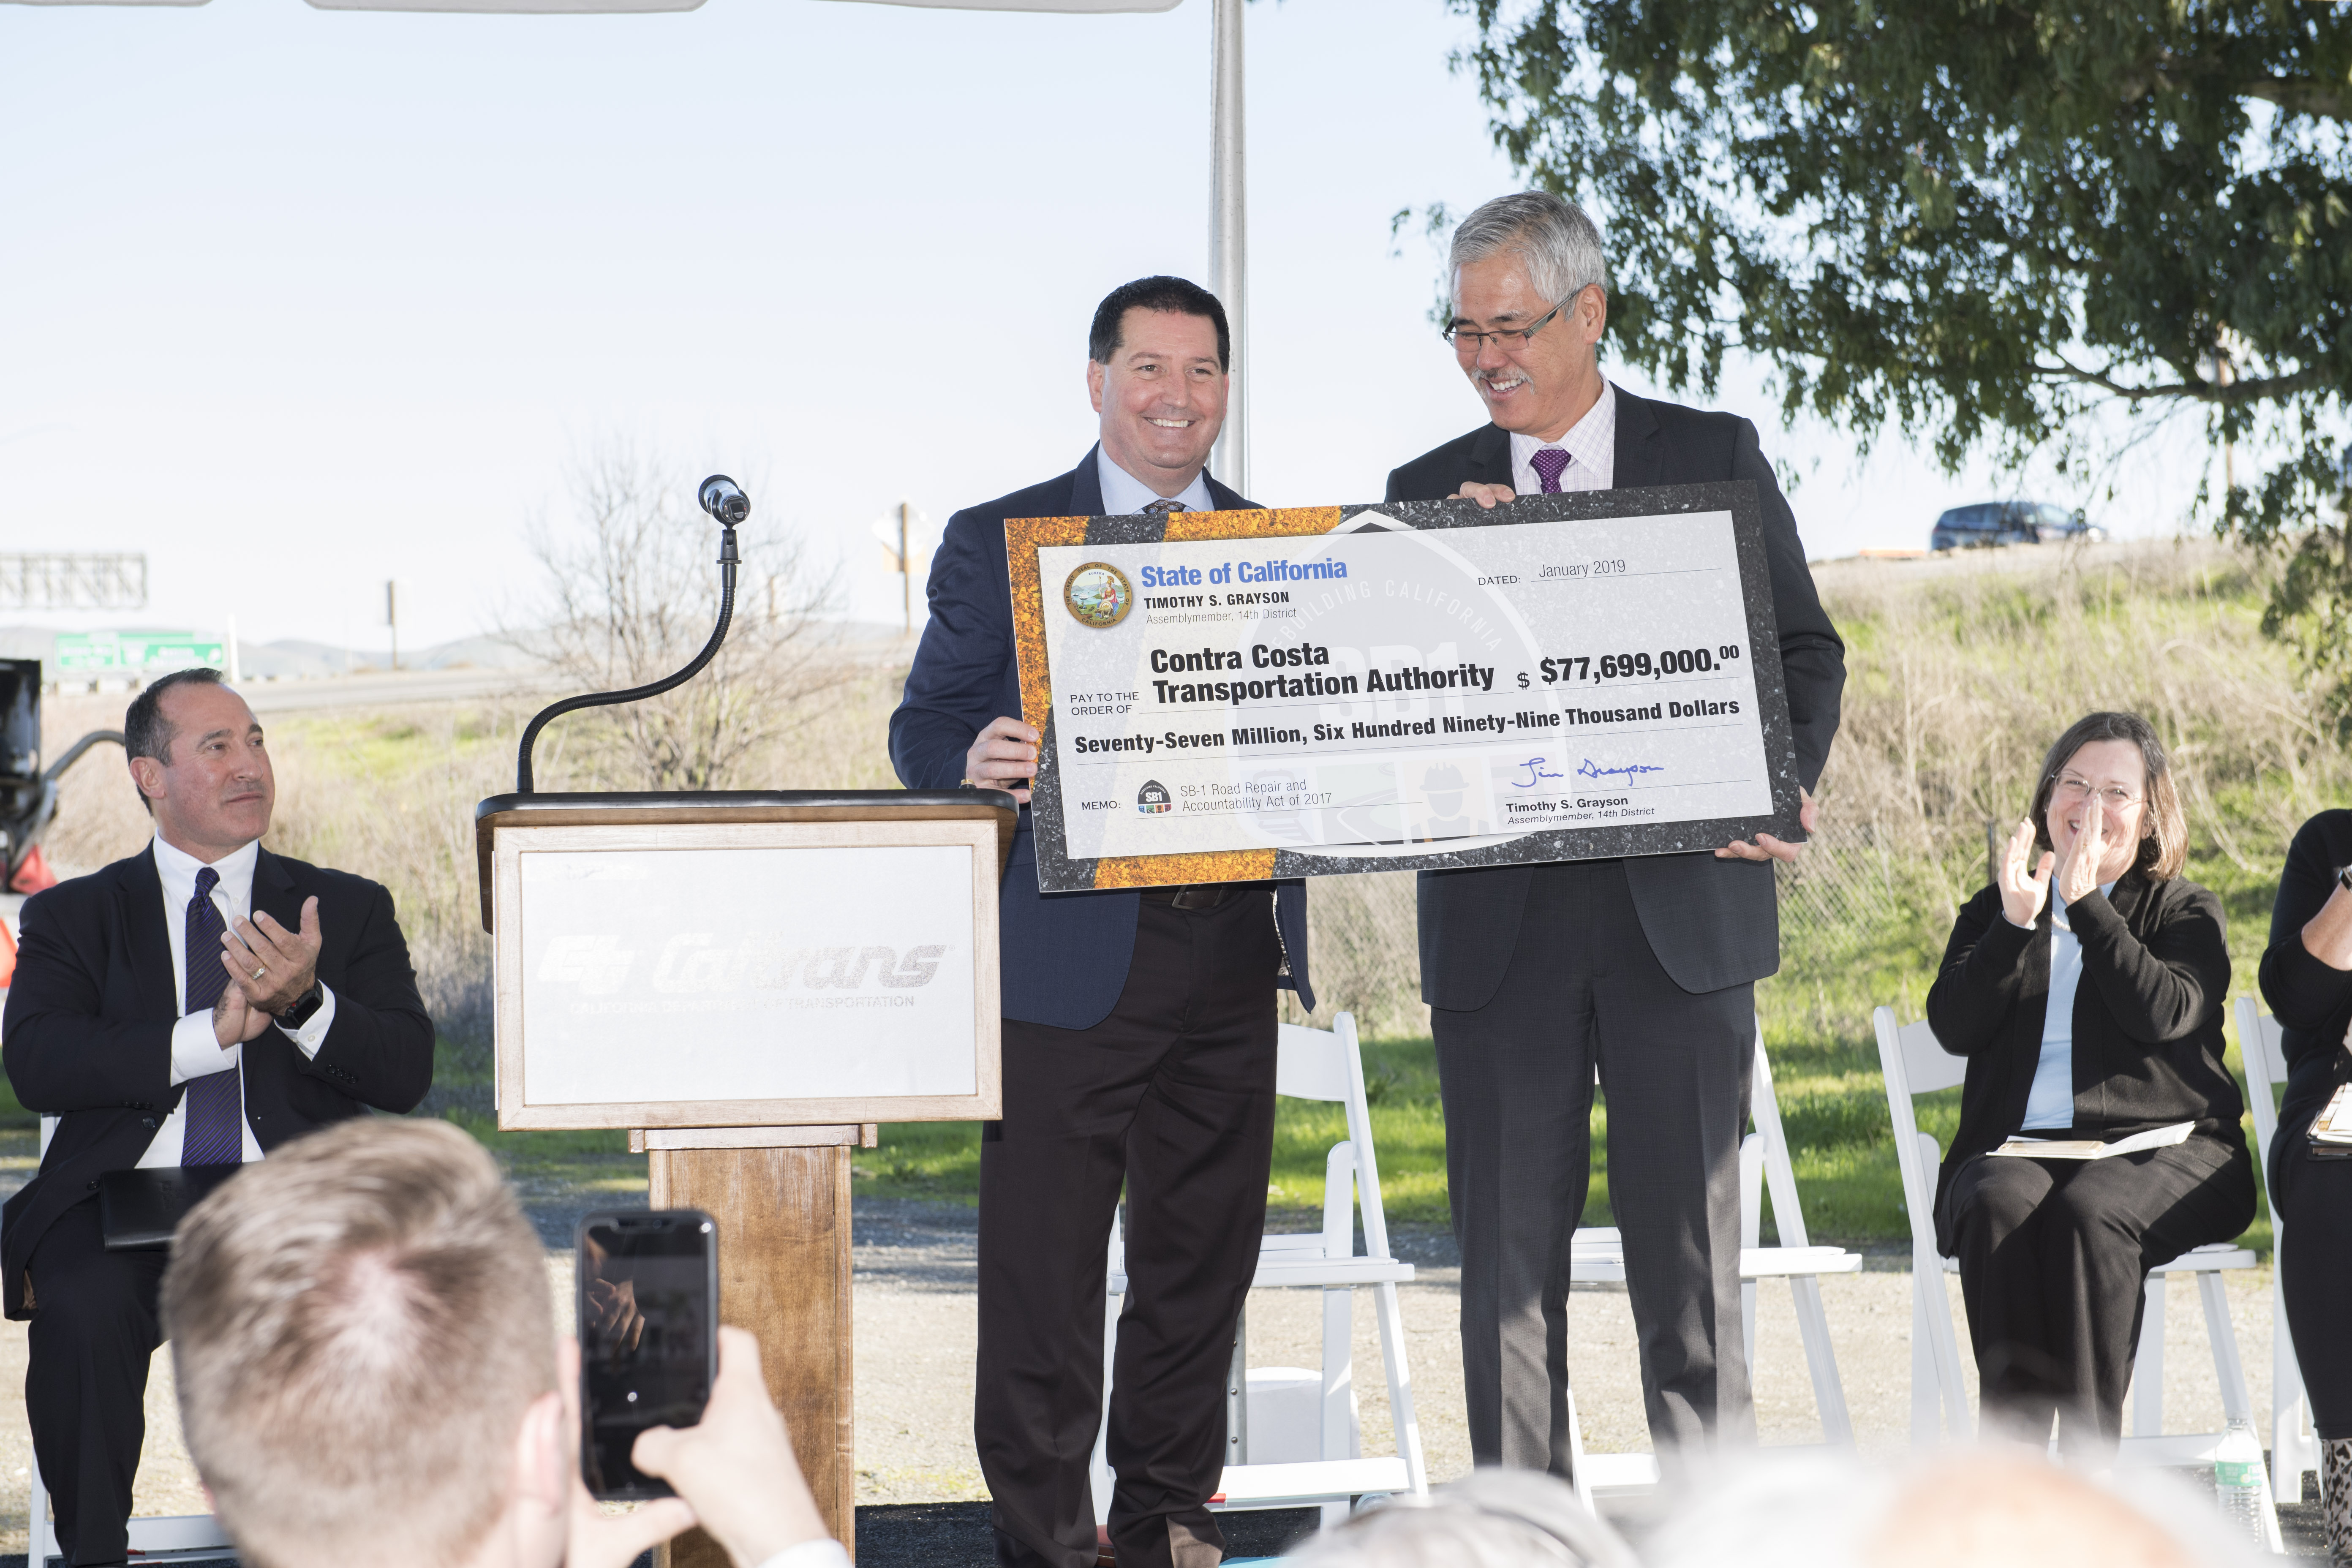 Assemblymember Grayson presents Contra Costa Transportation Authority with $77 million check for transportation funding